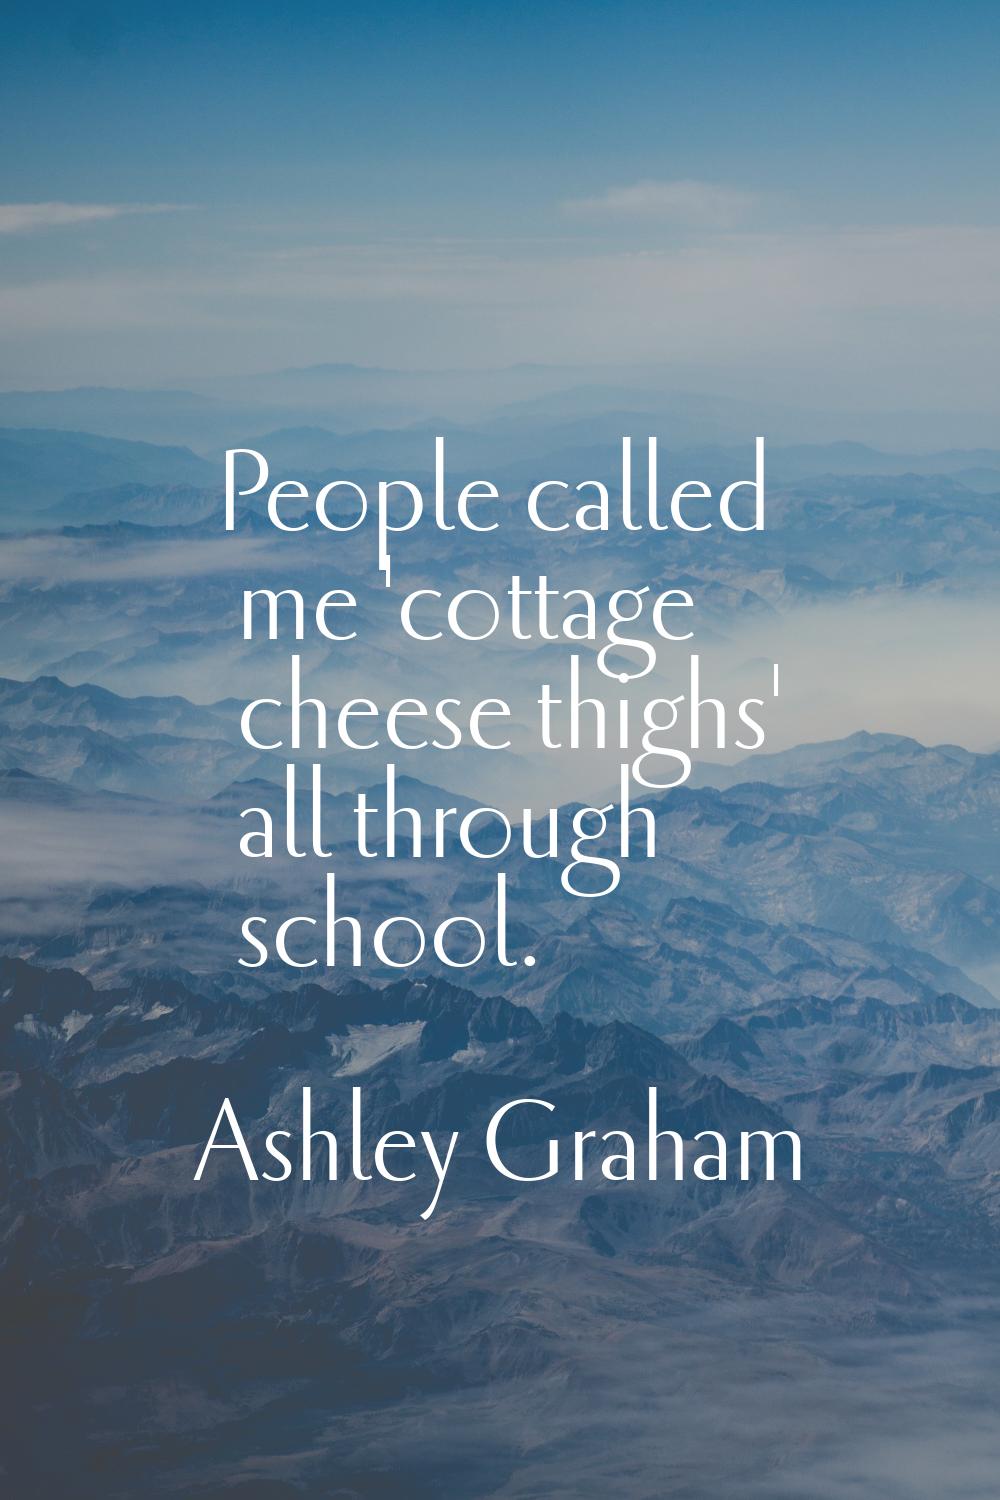 People called me 'cottage cheese thighs' all through school.